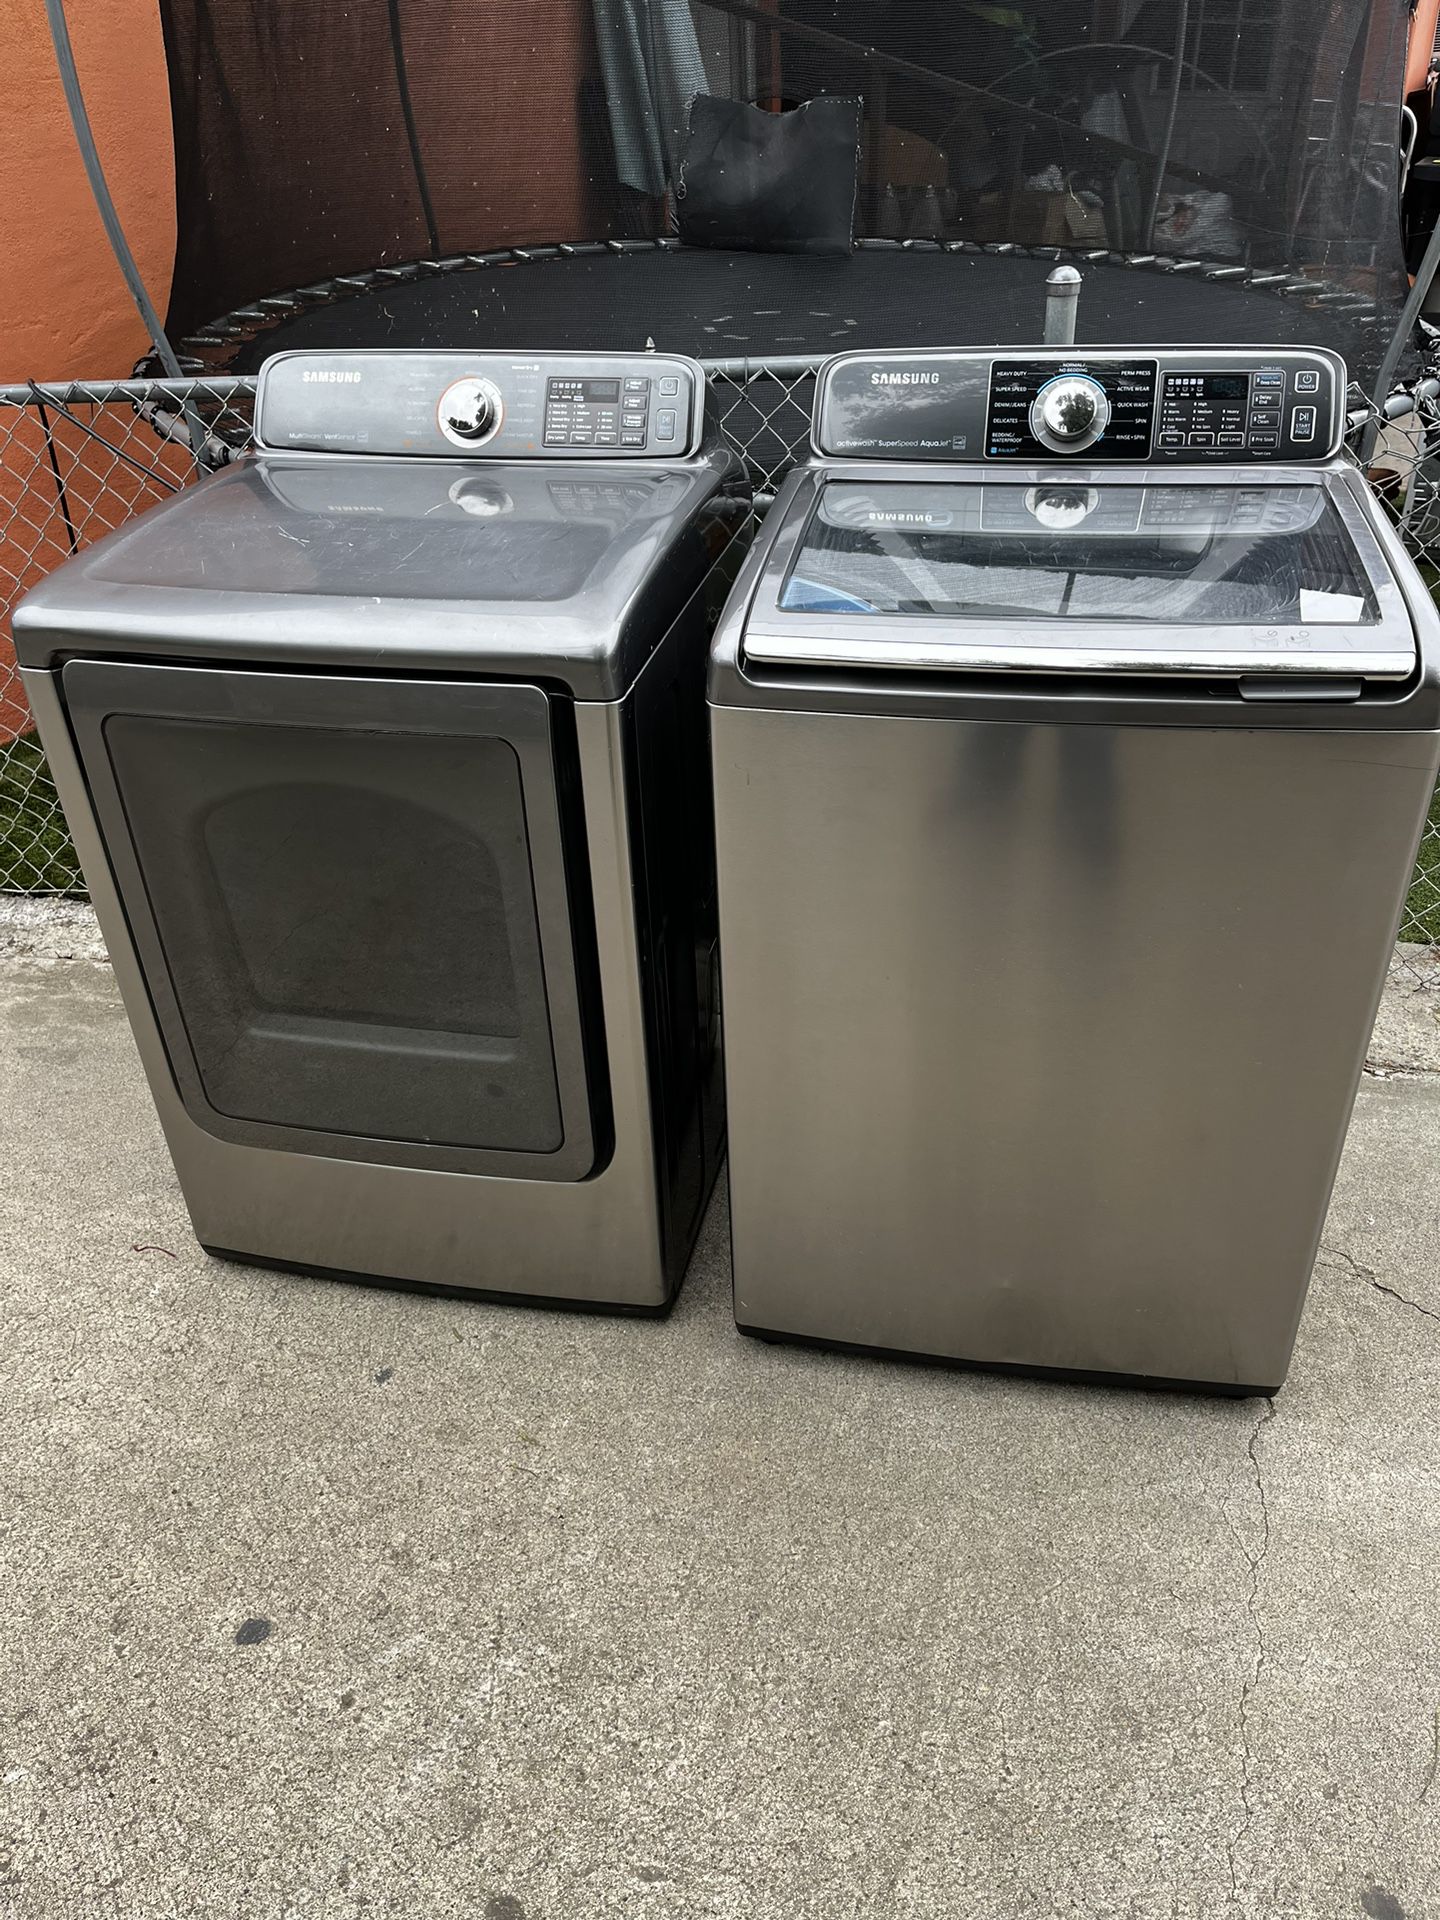 Washer And Dryer Samsung